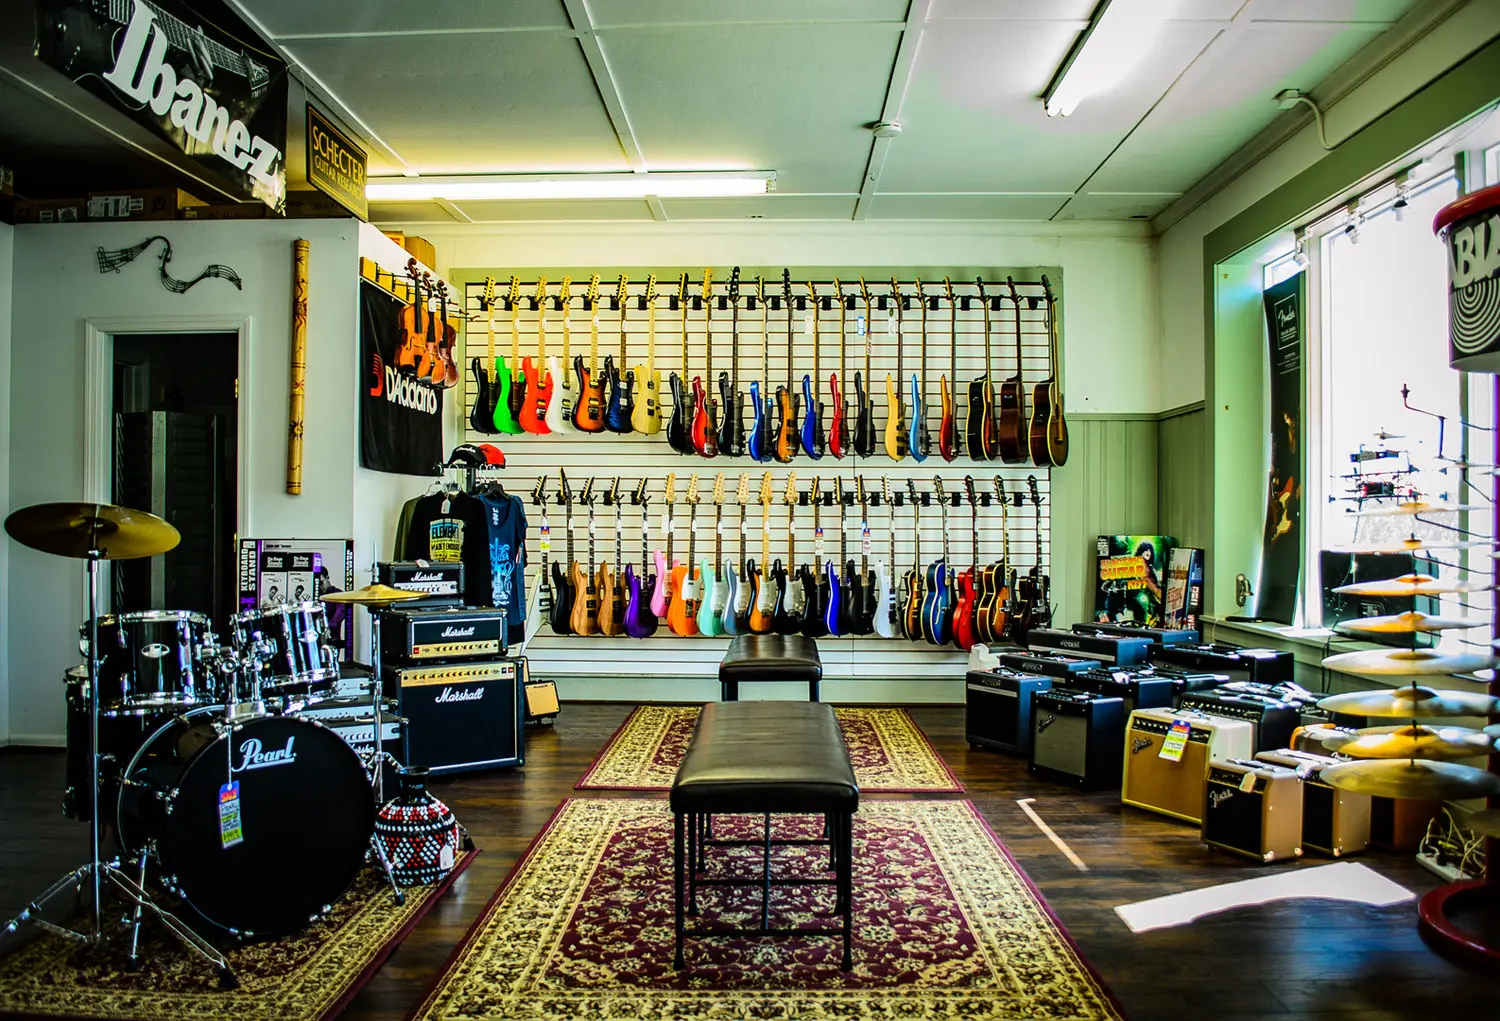 A room filled with lots of guitars and stands.